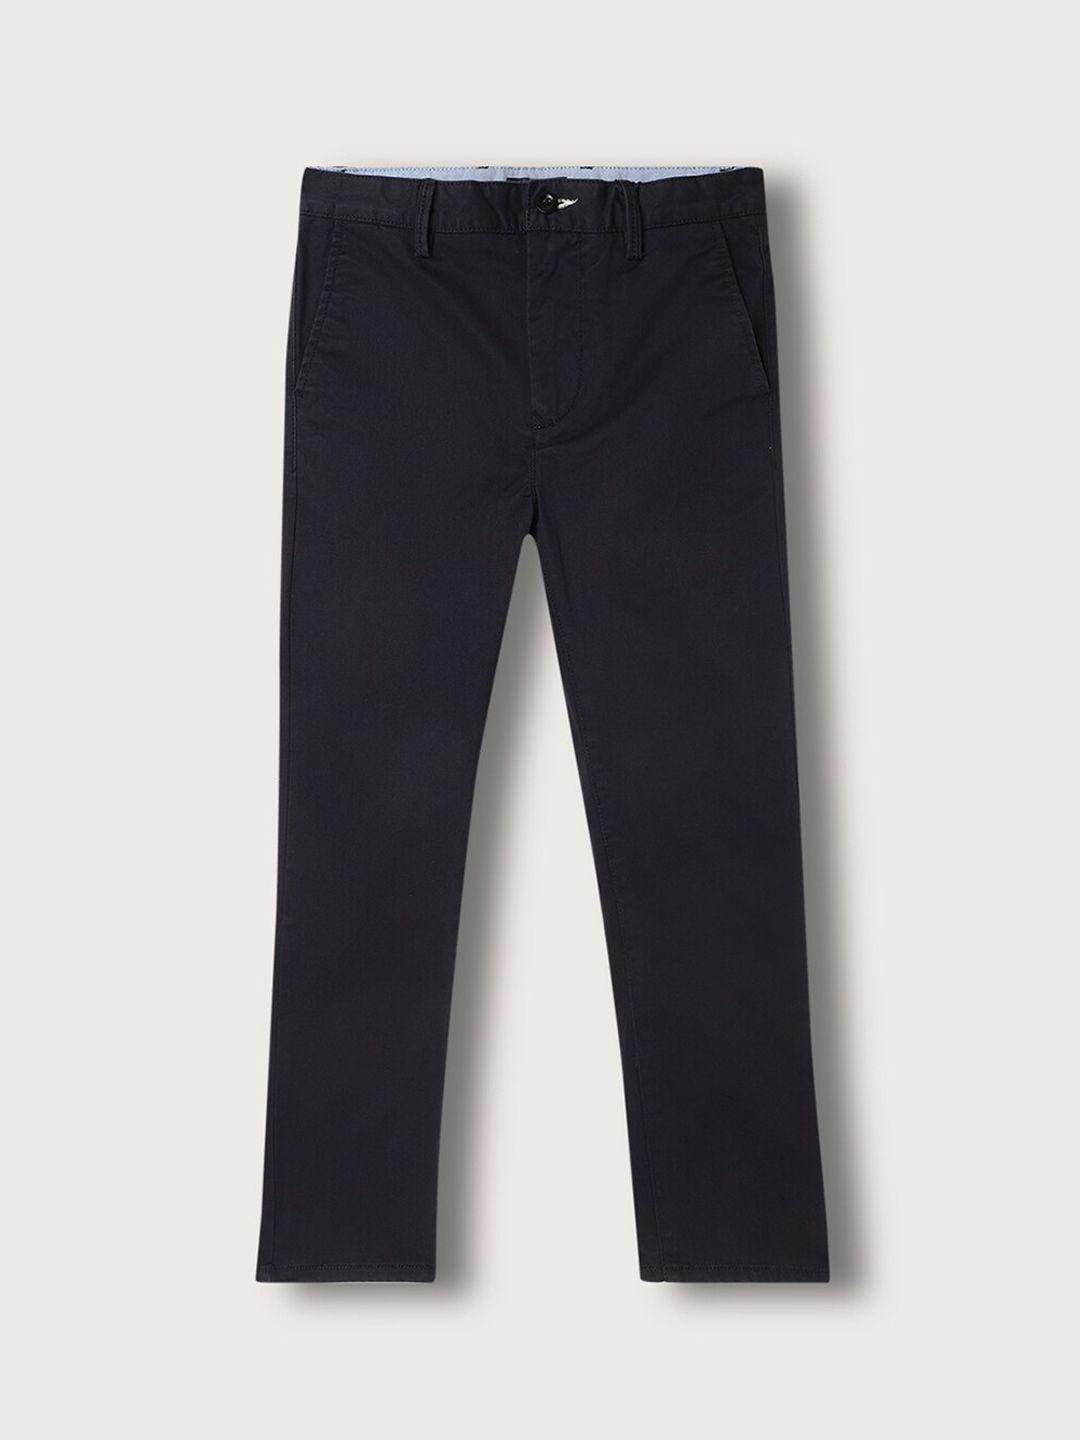 gant boys mid rise cotton chinos trousers